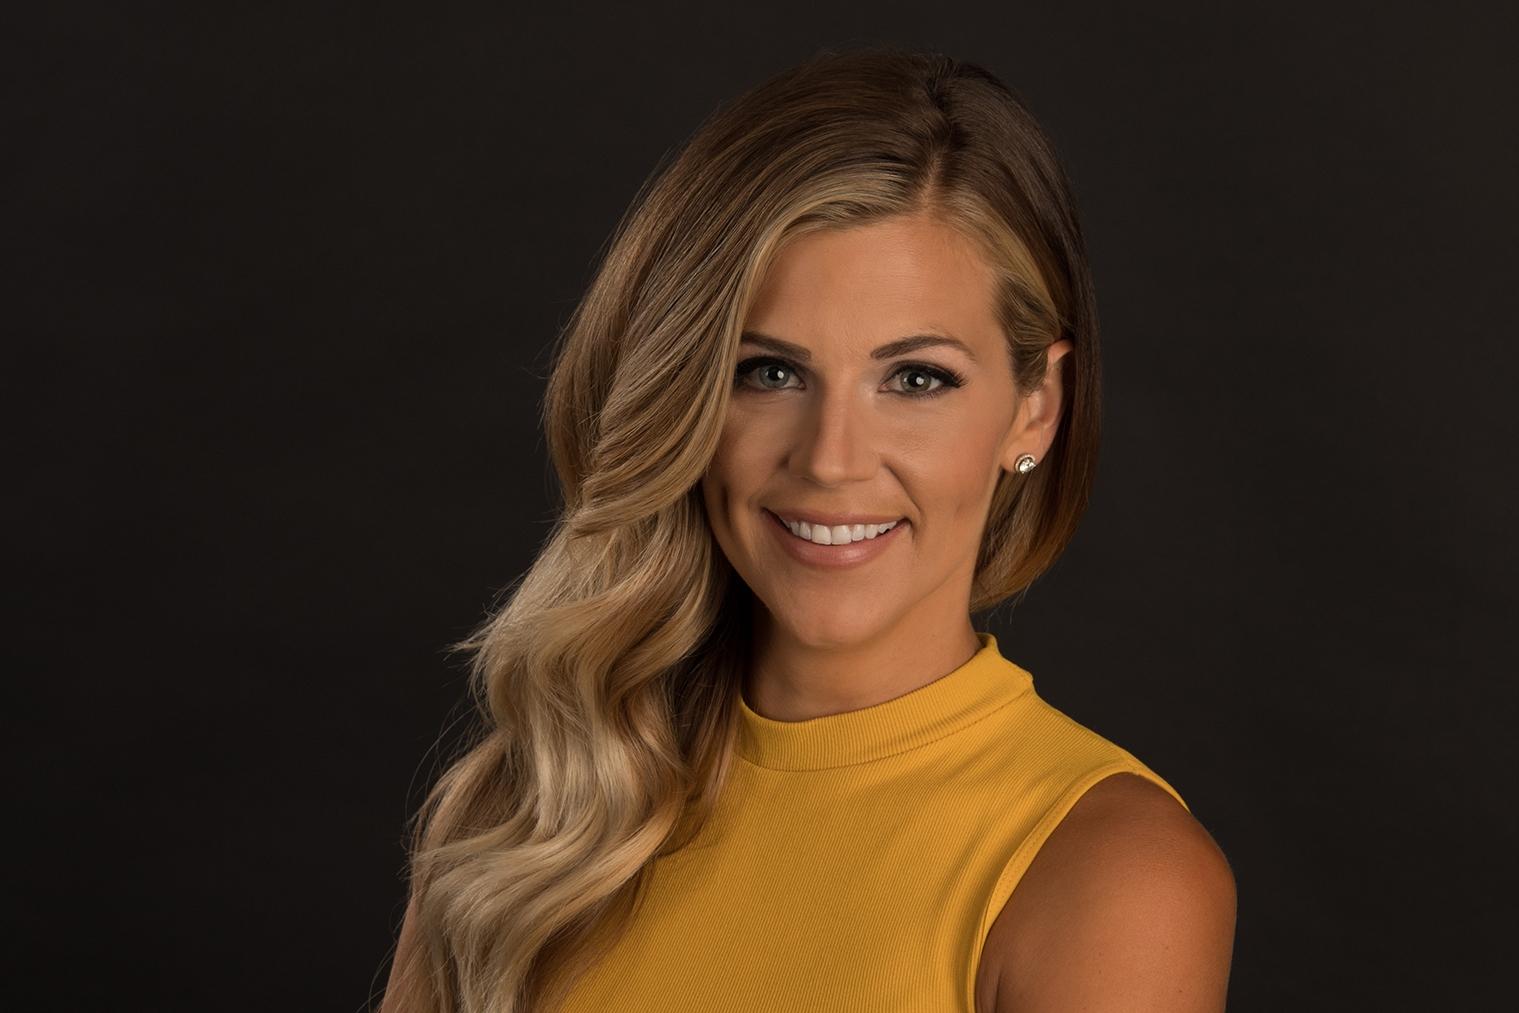 Samantha ponder is an american reporter and sportscaster whose net worth is...